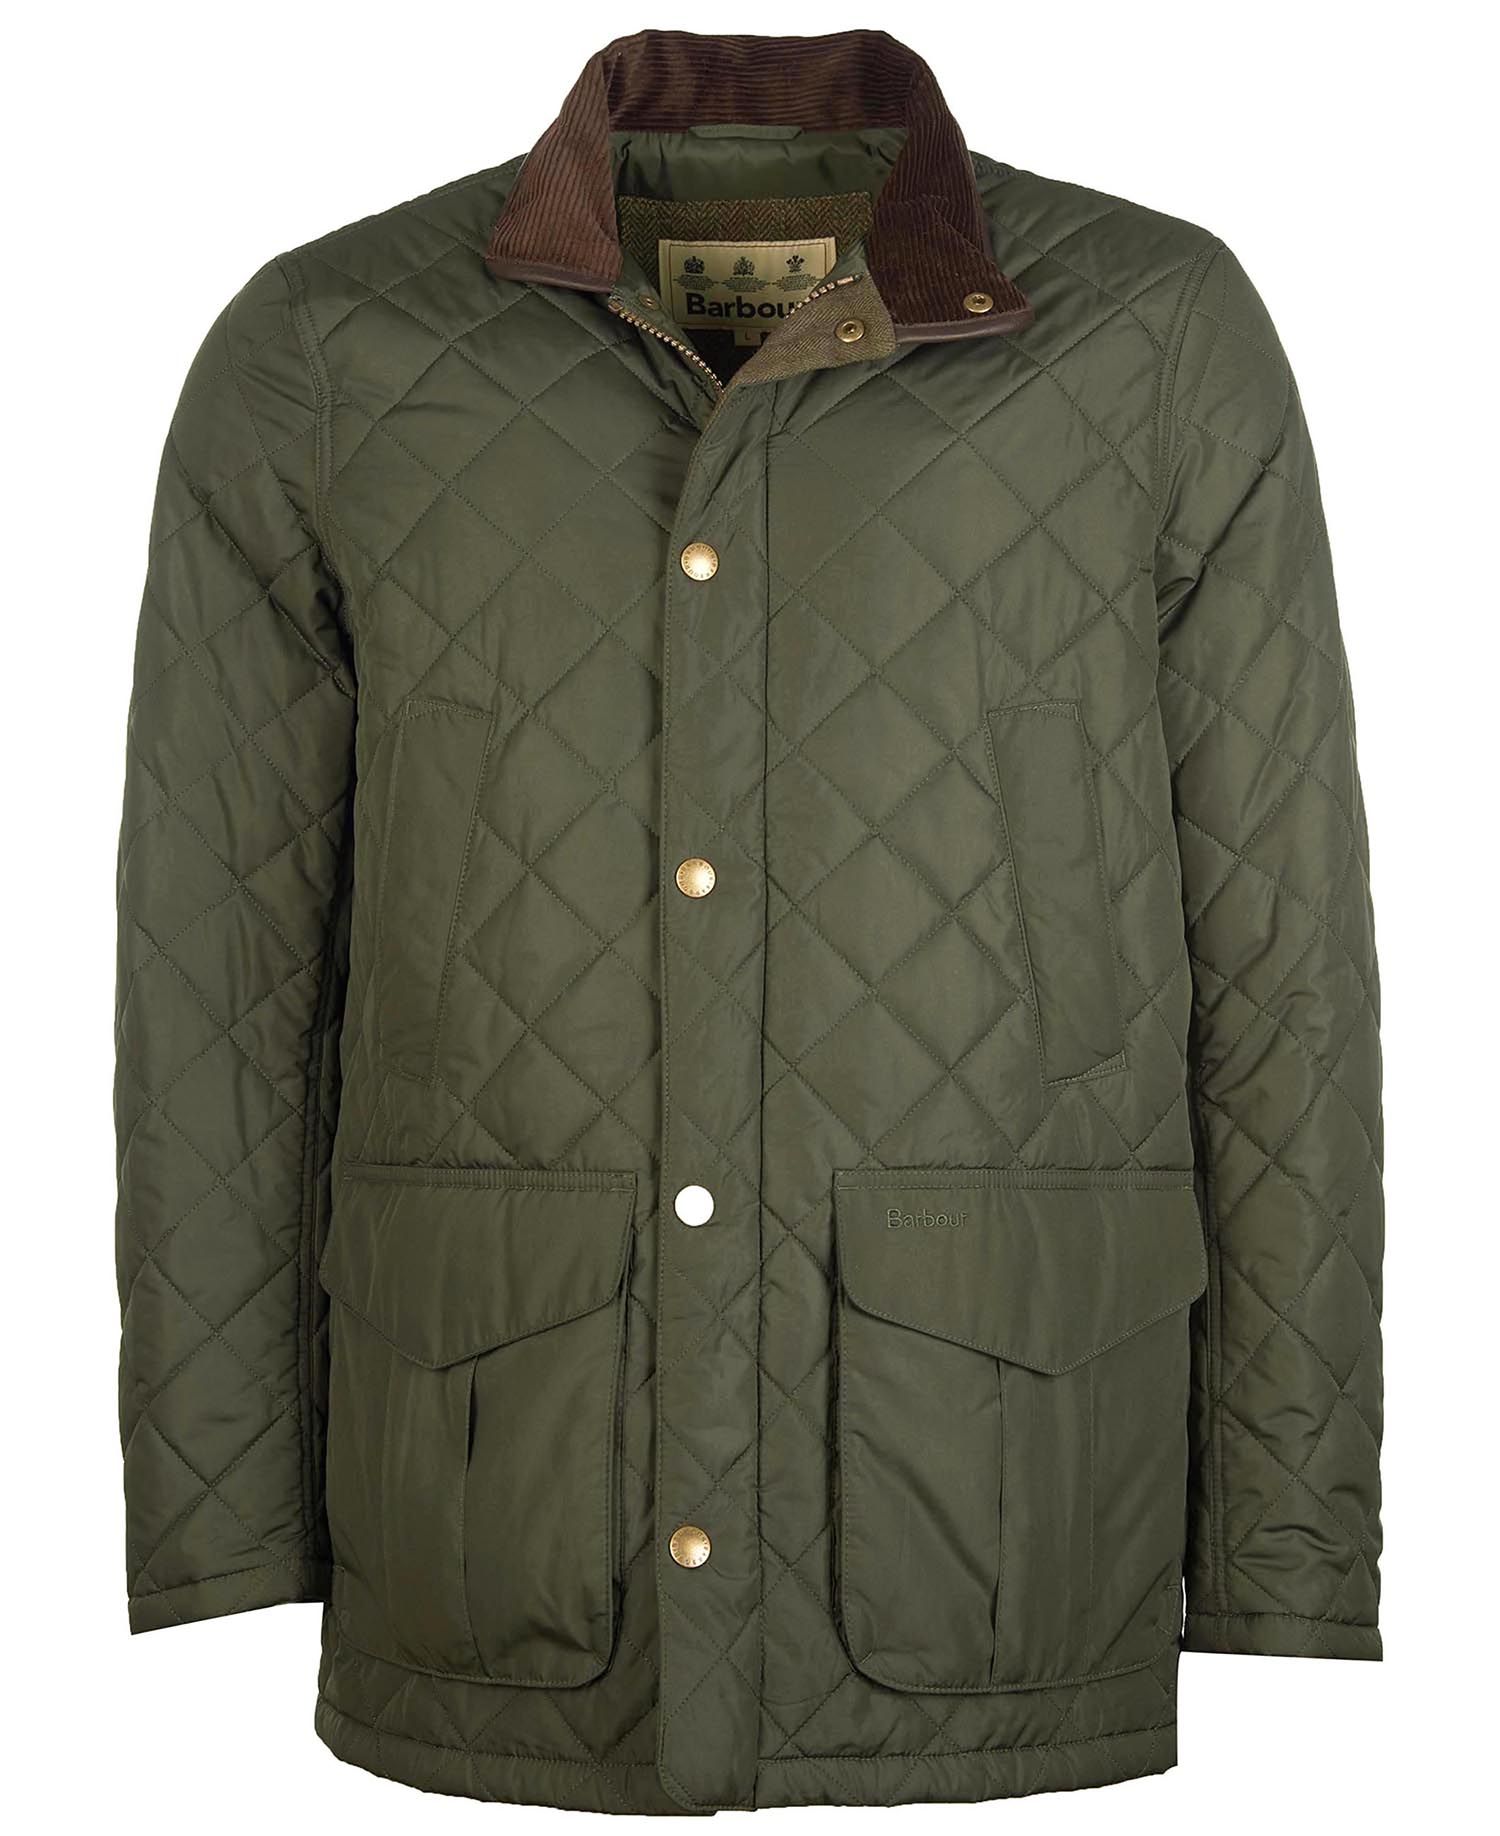 Barbour Devon Quilted Jacket - Olive SeriousCountrySports.com